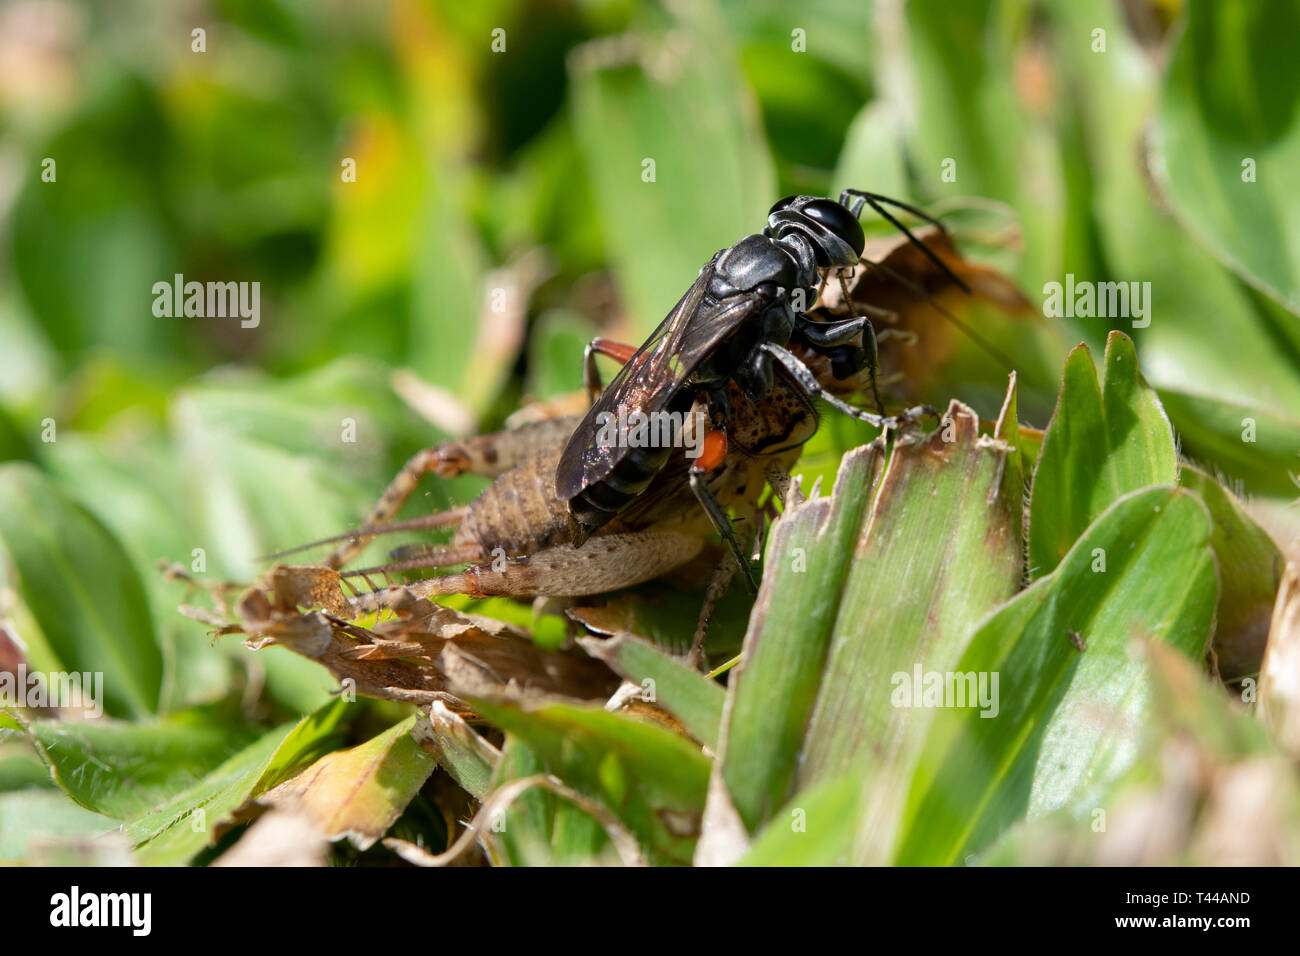 Sand Wasp, Liris sp, with House Cricket, Gryllidae Family, prey in grass where wasp will drag paralysed prey to burrow to lay egg on, Klungkung, Bali Stock Photo